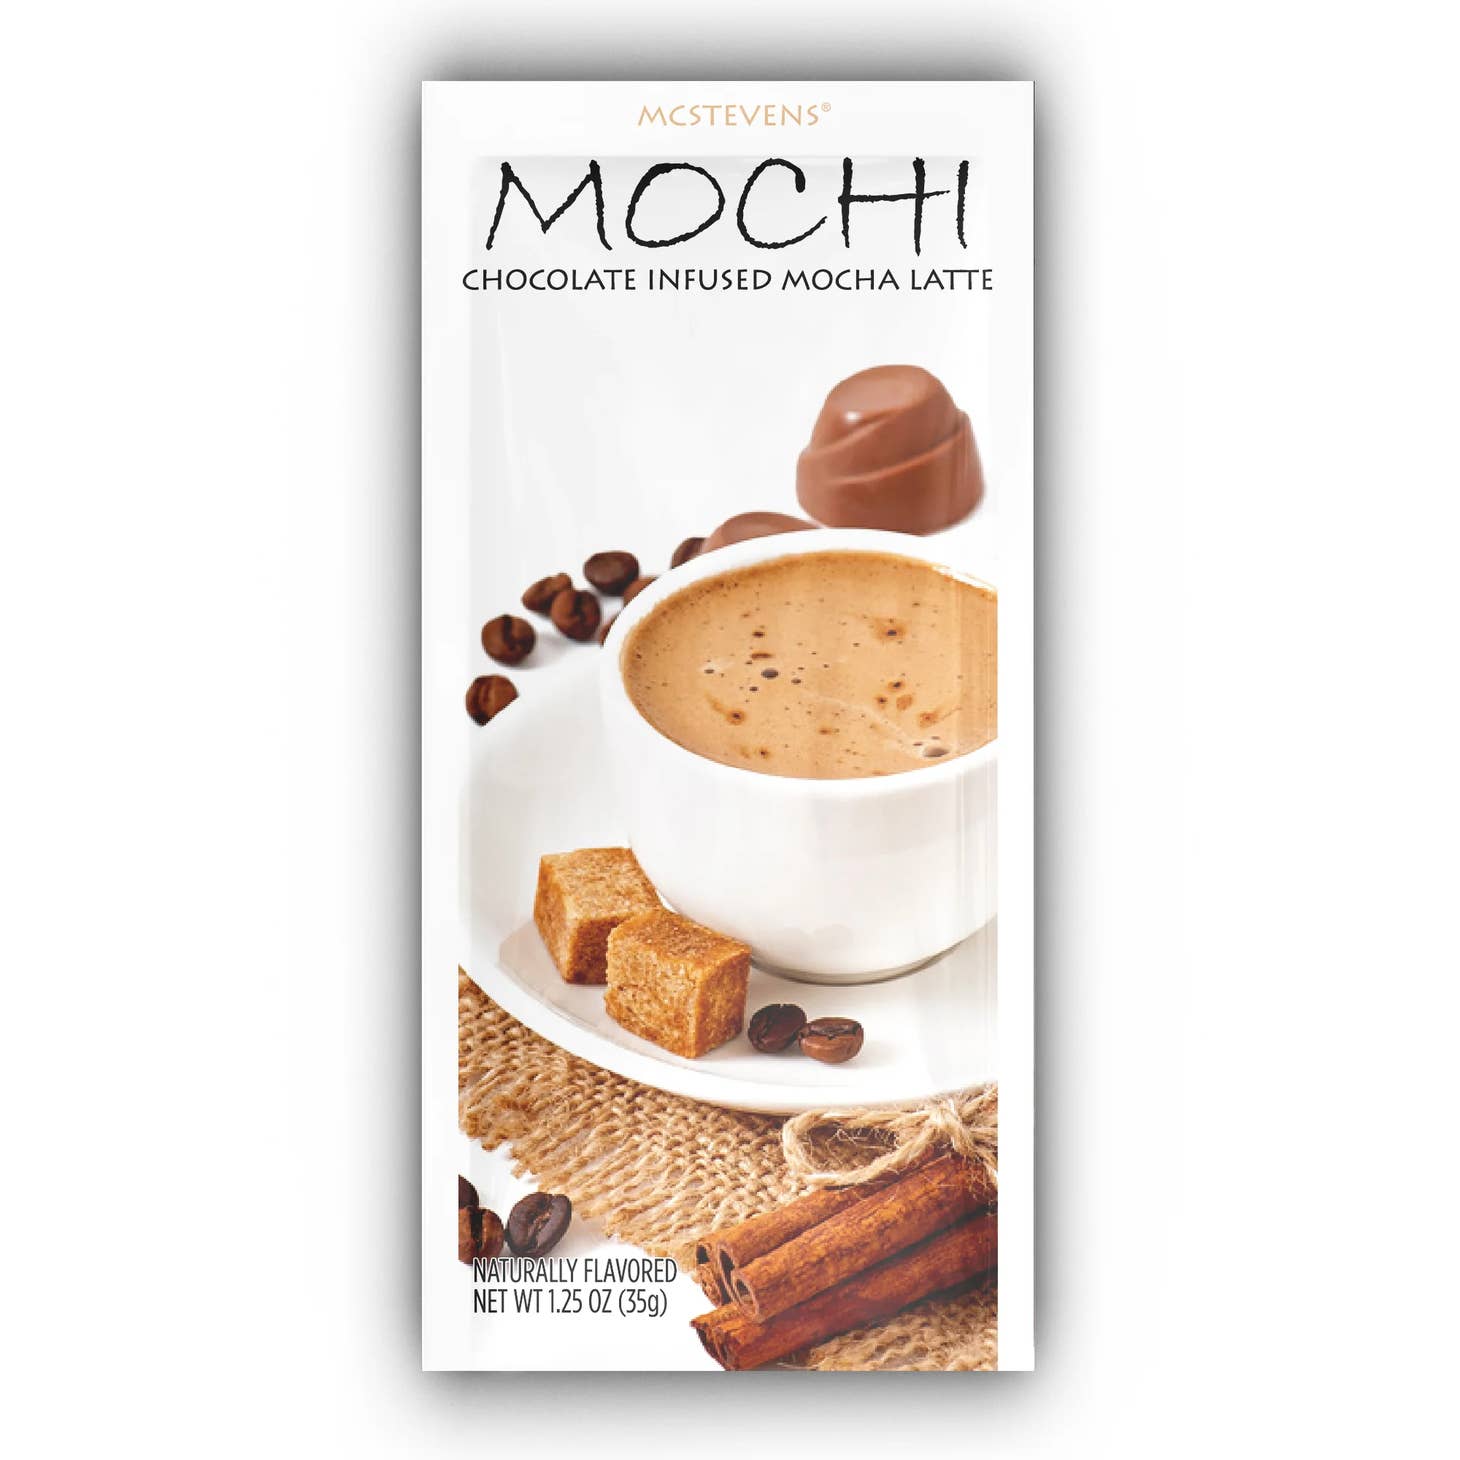 mochi chocolate mocha latte packet with a cup of mochi and cinnamon sticks printed on it